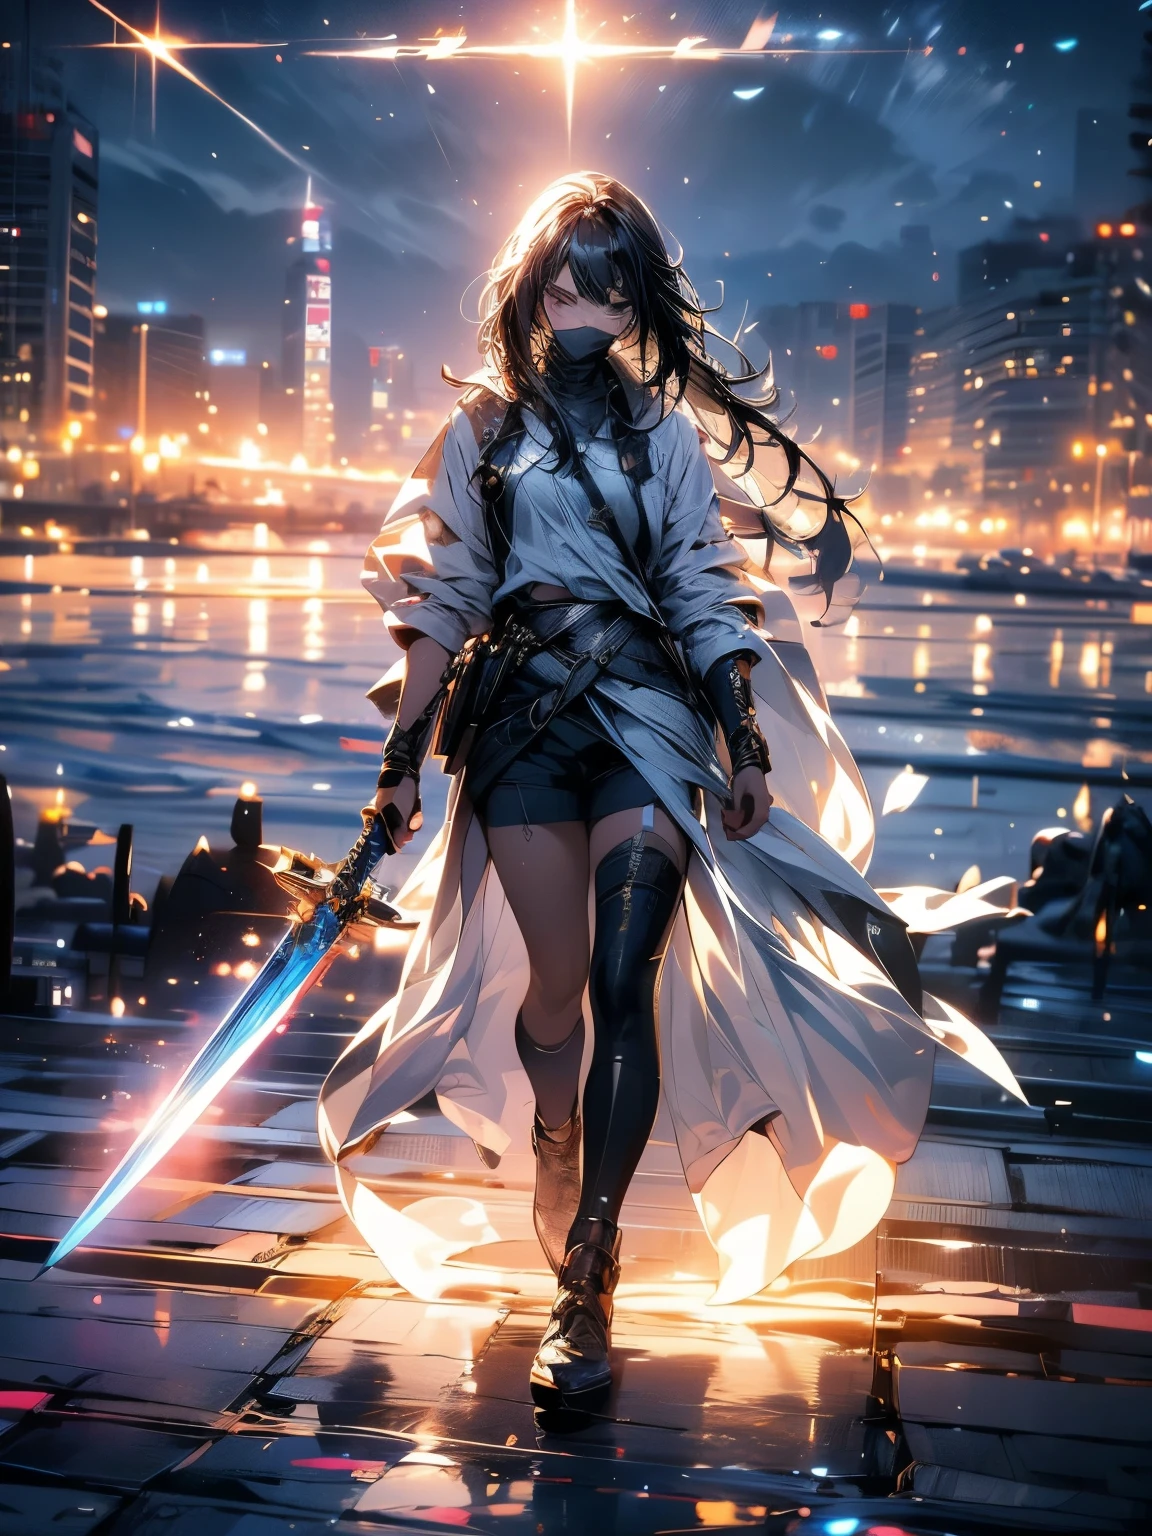 Create Ultra High Definition, Masterpiece quality image with white theme, Featuring a cute anime girl with long black hair in a cool pose, Attack with a high-tech sword. In this scene、A large number of holographic swords appear floating in a circle.。, Each one has countless intricate parts, Set in a predominantly white cyberpunk environment. The scene is enriched with holographic elements and light particles., Emphasizing futuristic and fantastical aesthetics. The image is、Capturing the essence of purity and sophistication with the finest quality and beauty, A super detailed display of a girl and her holographic sword, Super-resolution visuals that highlight the intricate details of a scene.